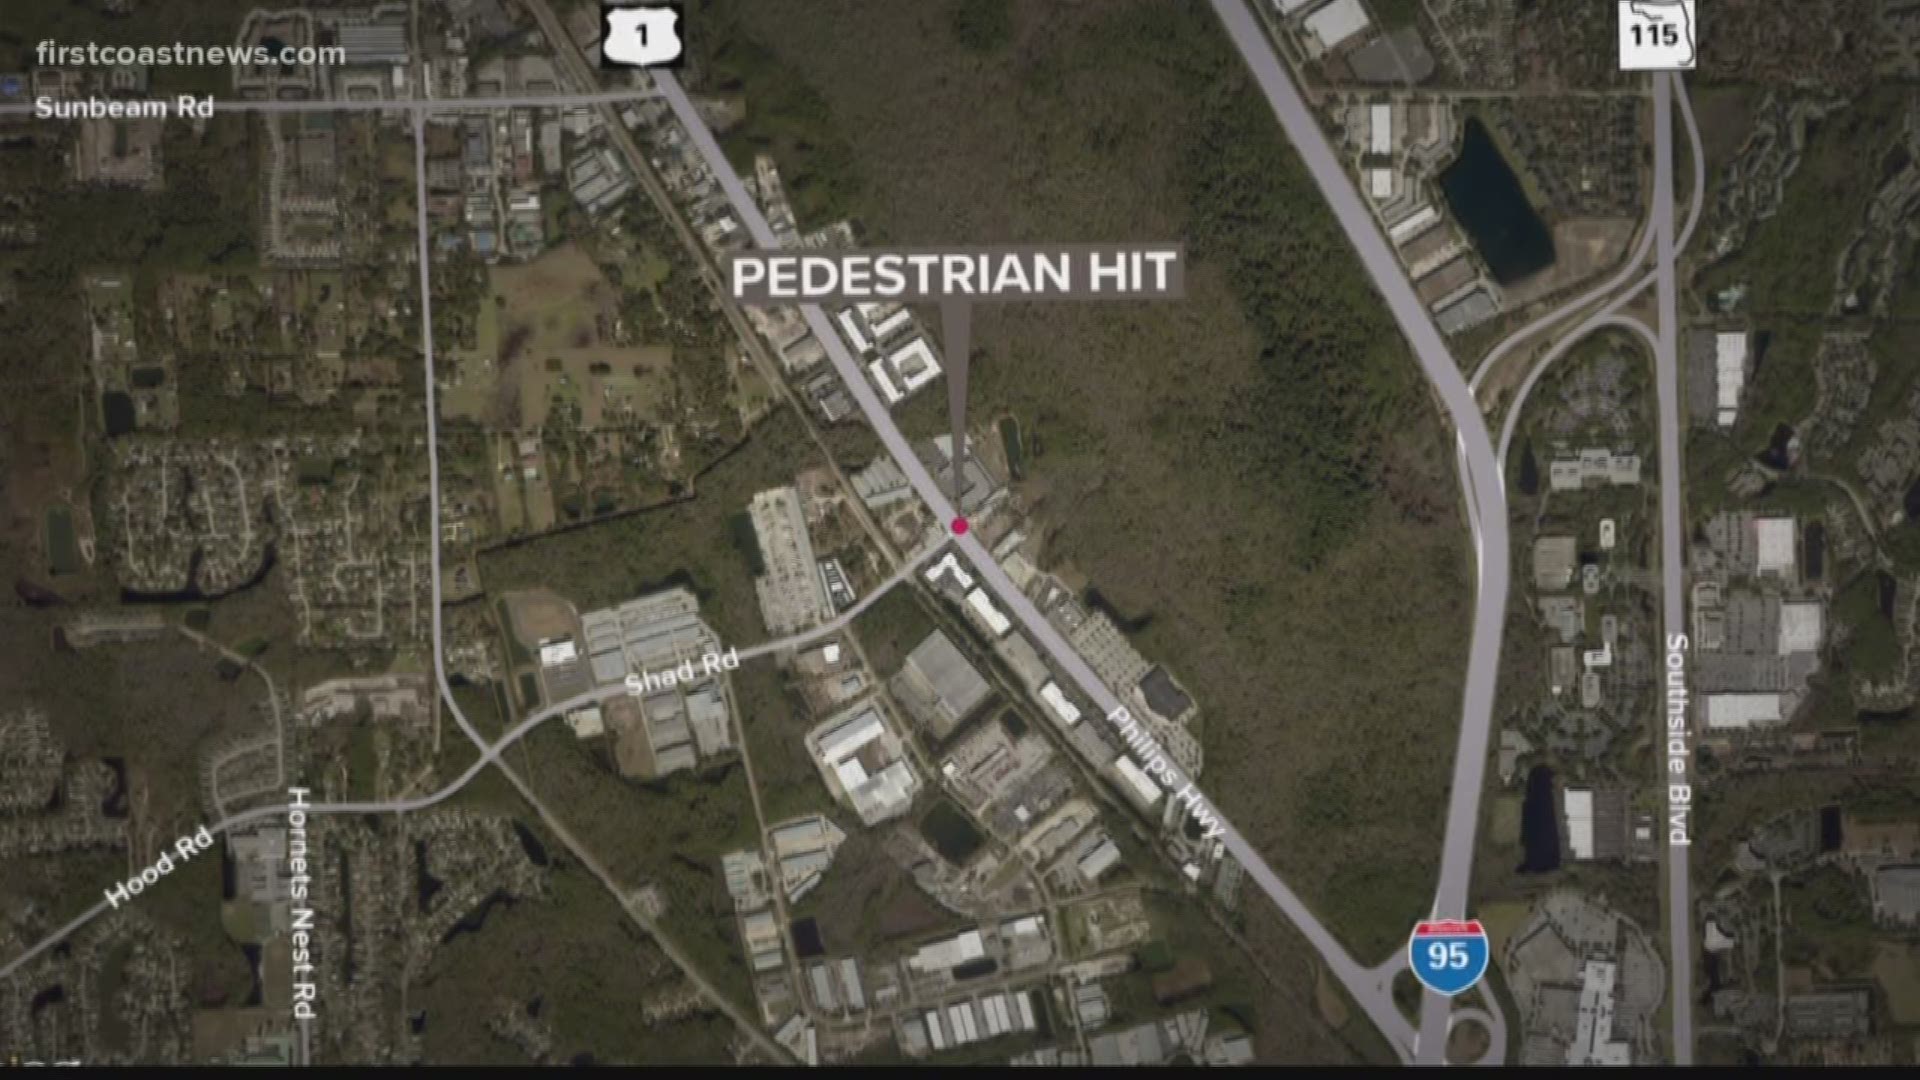 The incident happened at Philips Highway and Shad Road, JSO said.